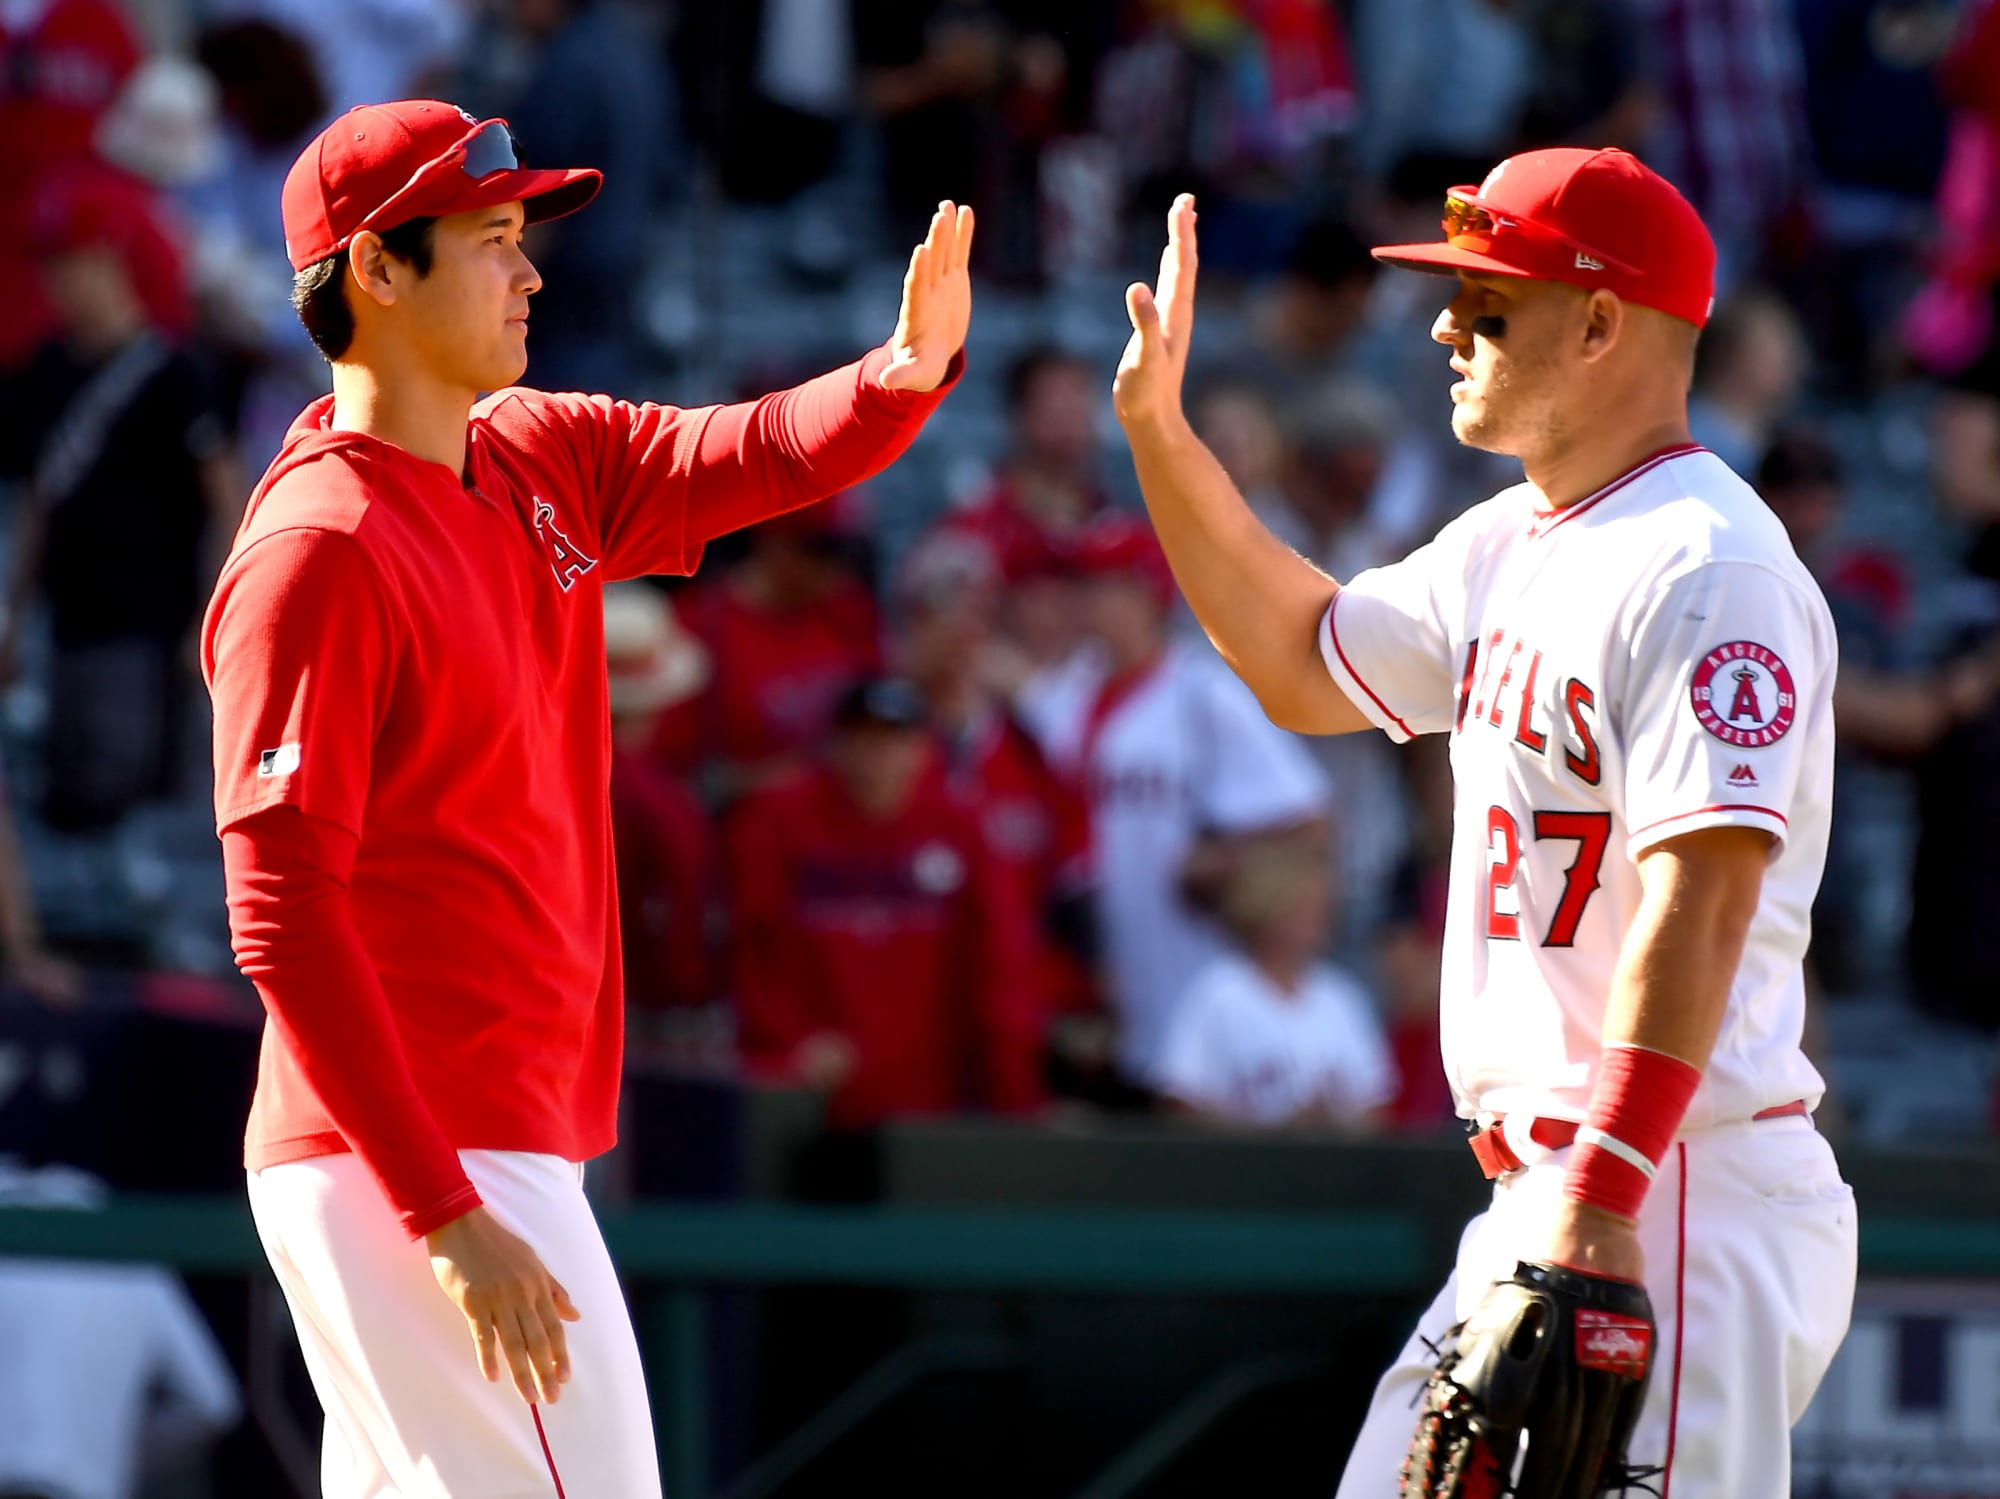 Los Angeles Angels: Are we sure Shohei Ohtani returning is a good idea?